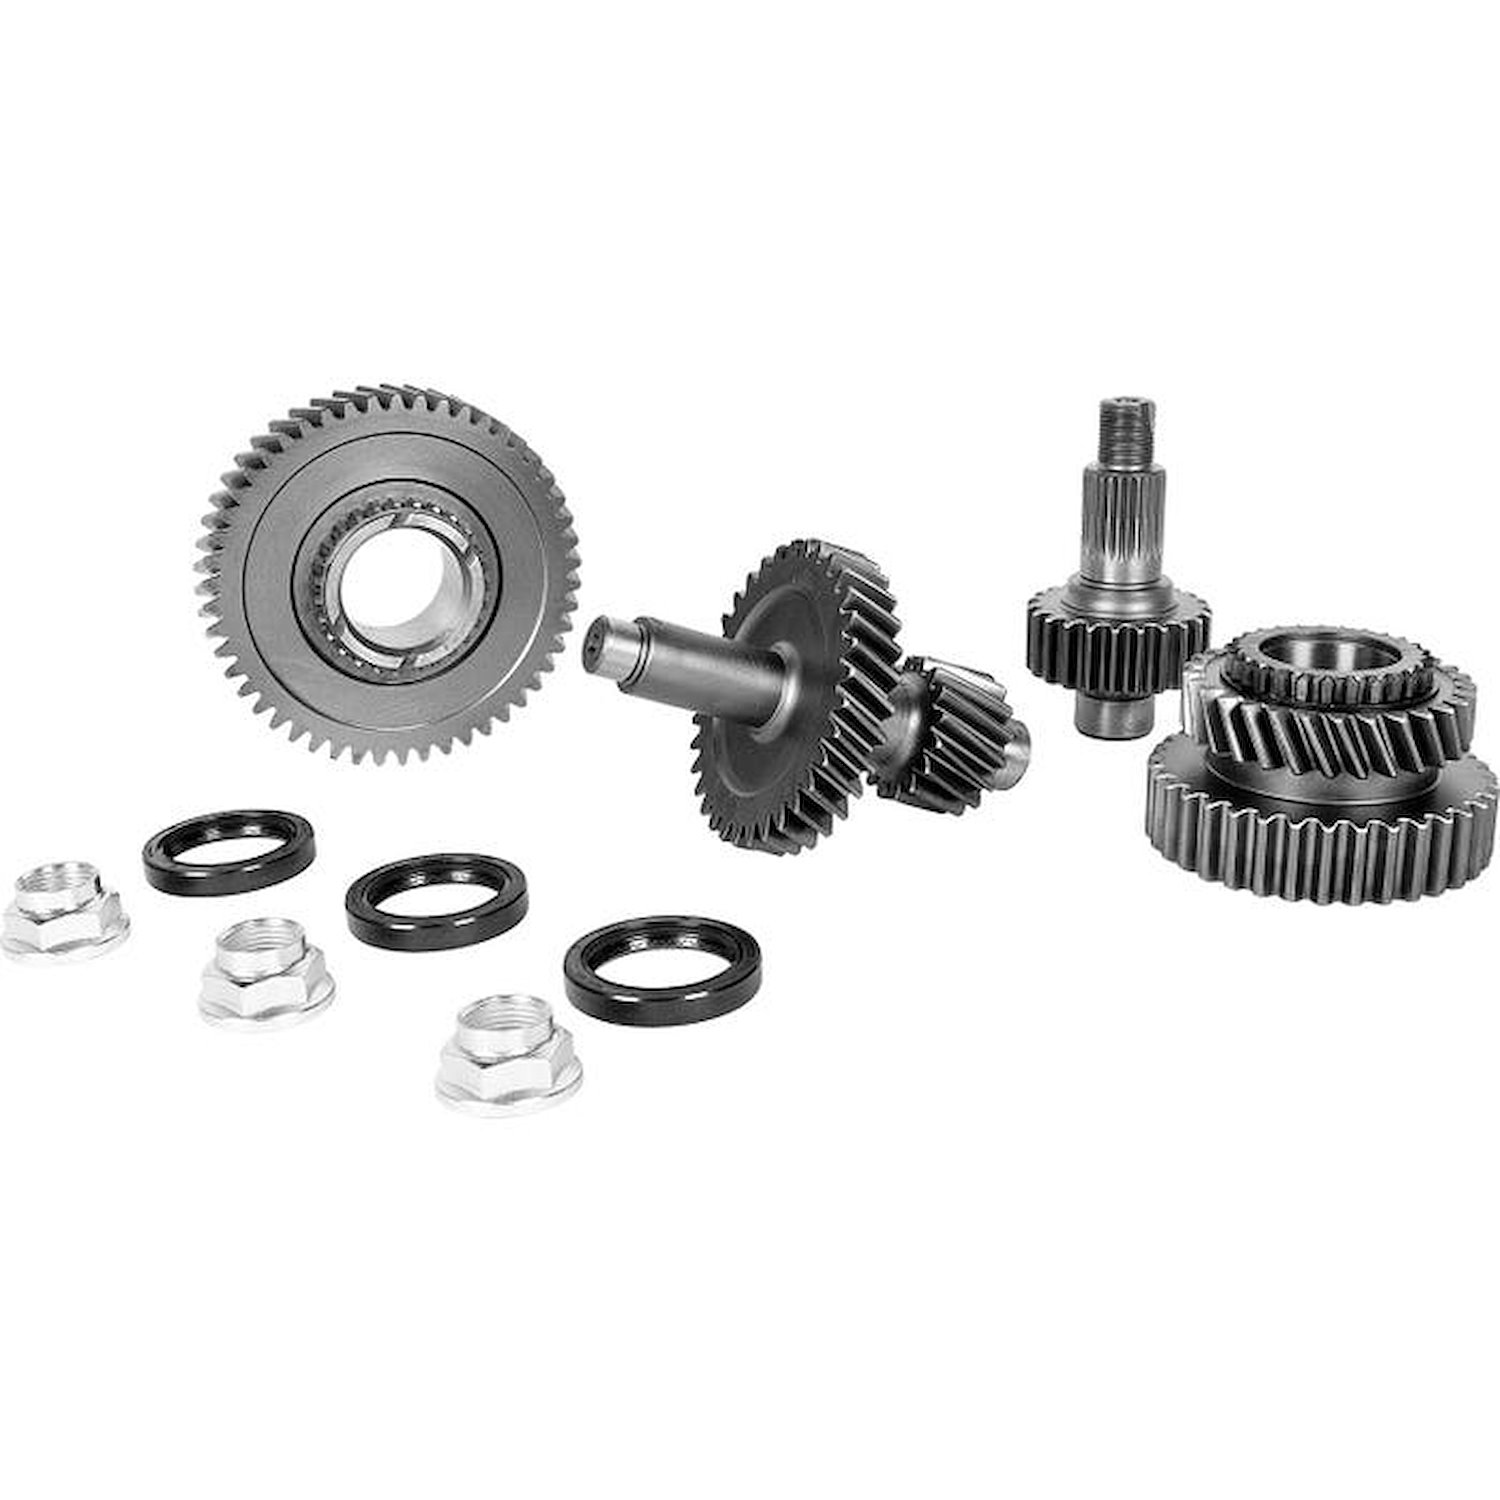 TGI-308359 Transfer Case Gear Set, For Suzuki Jimny Electric Pushbutton With Auto Transmissions (15% High/104% Low)